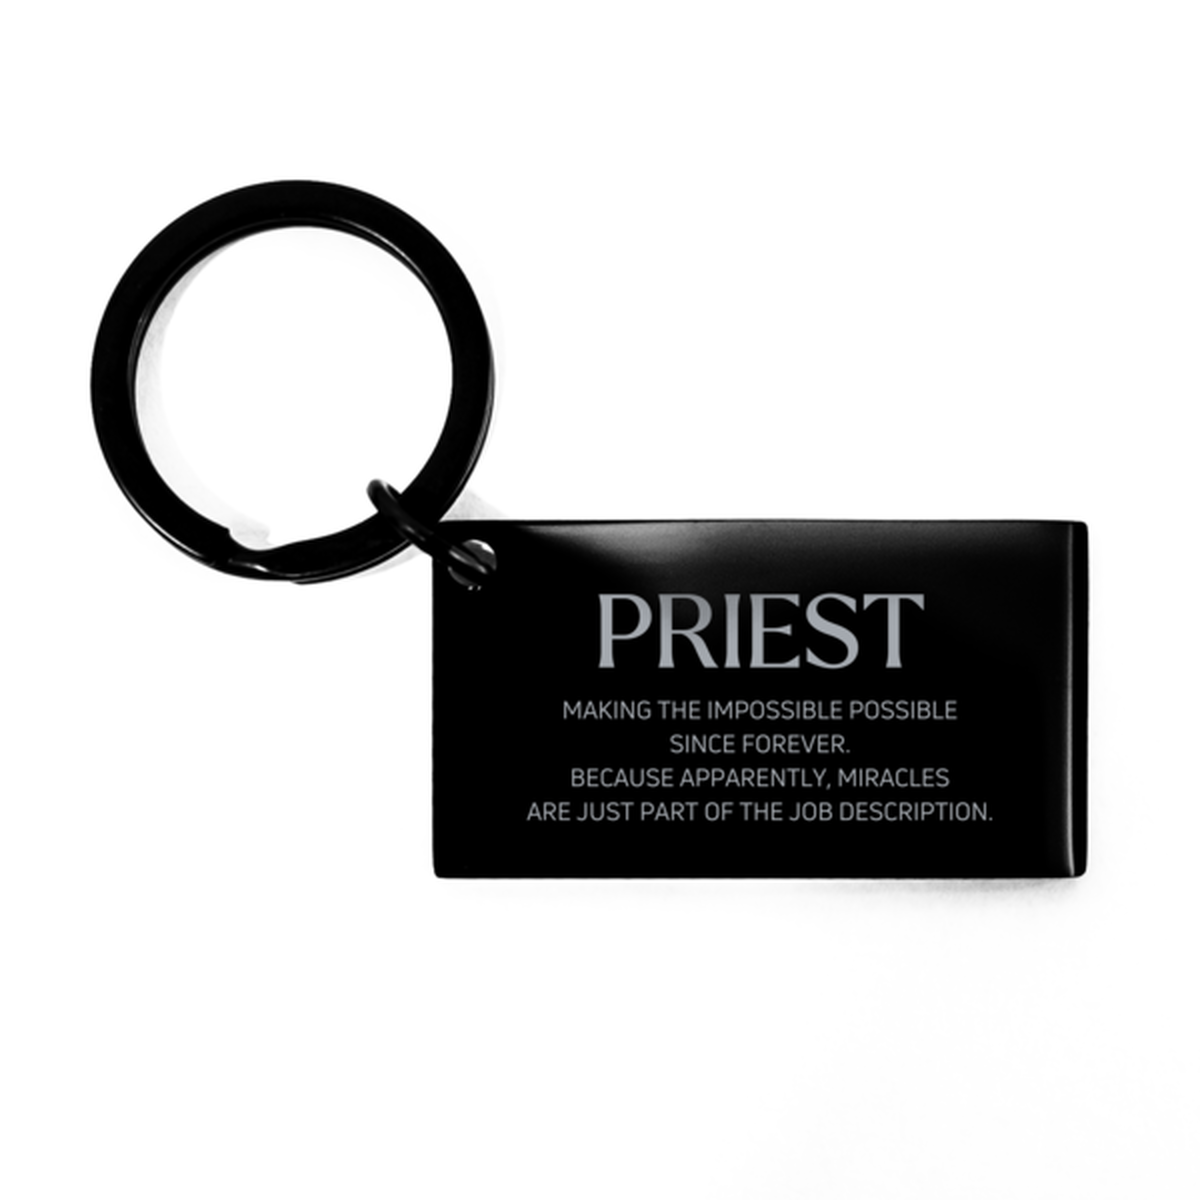 Funny Priest Gifts, Miracles are just part of the job description, Inspirational Birthday Keychain For Priest, Men, Women, Coworkers, Friends, Boss